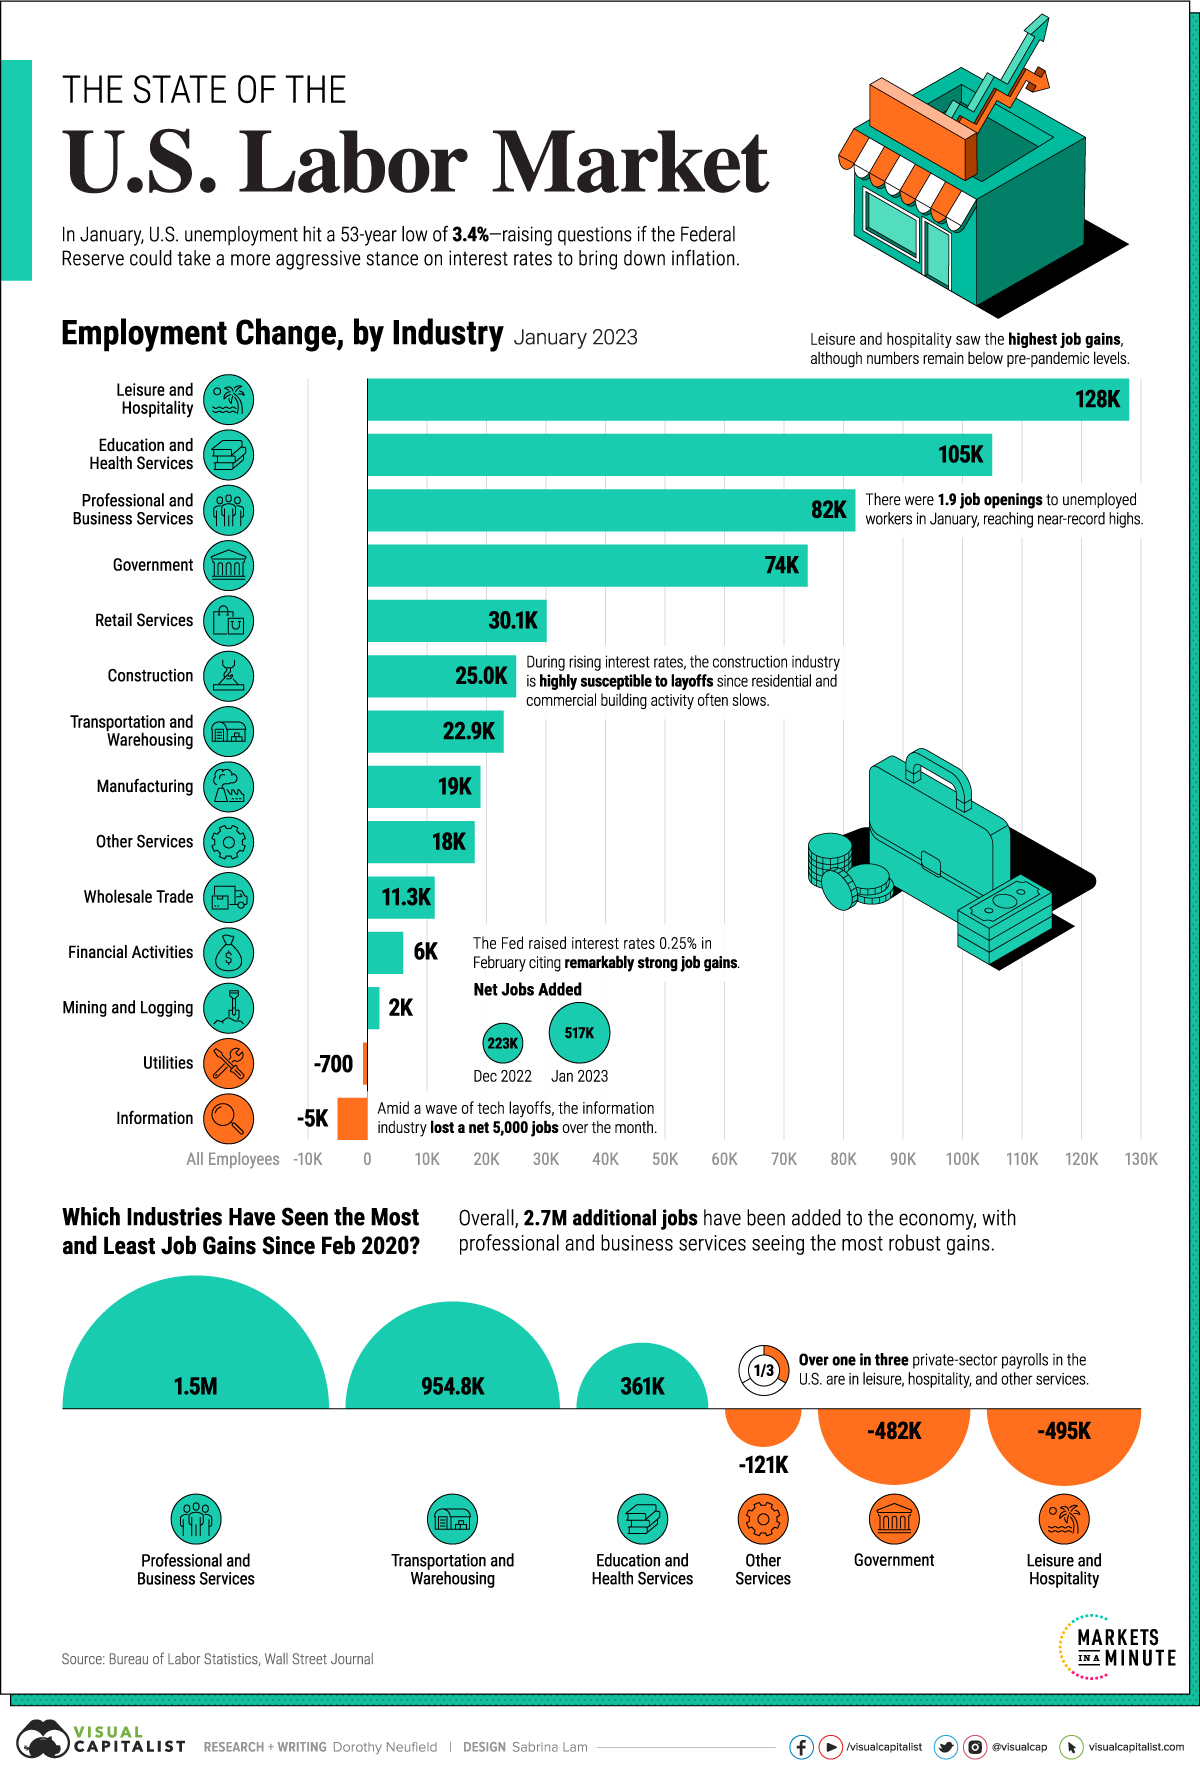 Visualized: The State of the U.S. Labor Market